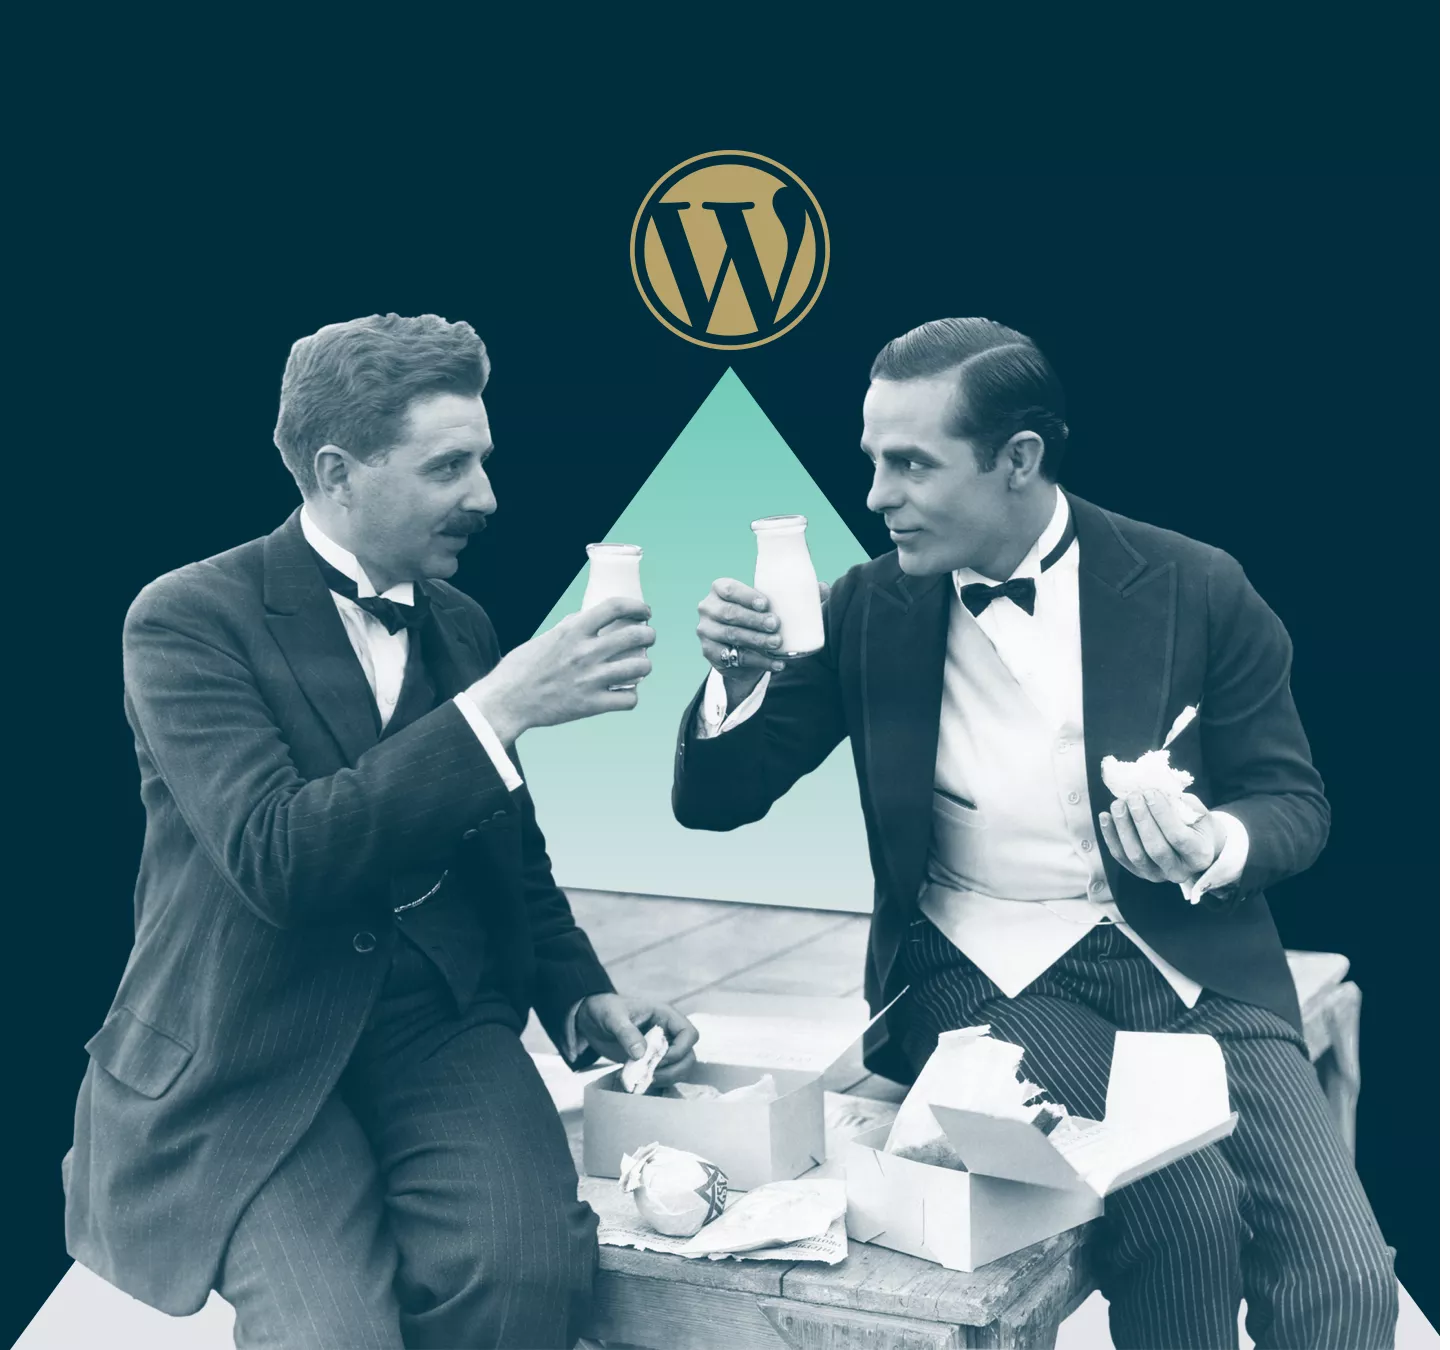 Two Men Drinking with WordPress Logo on Top